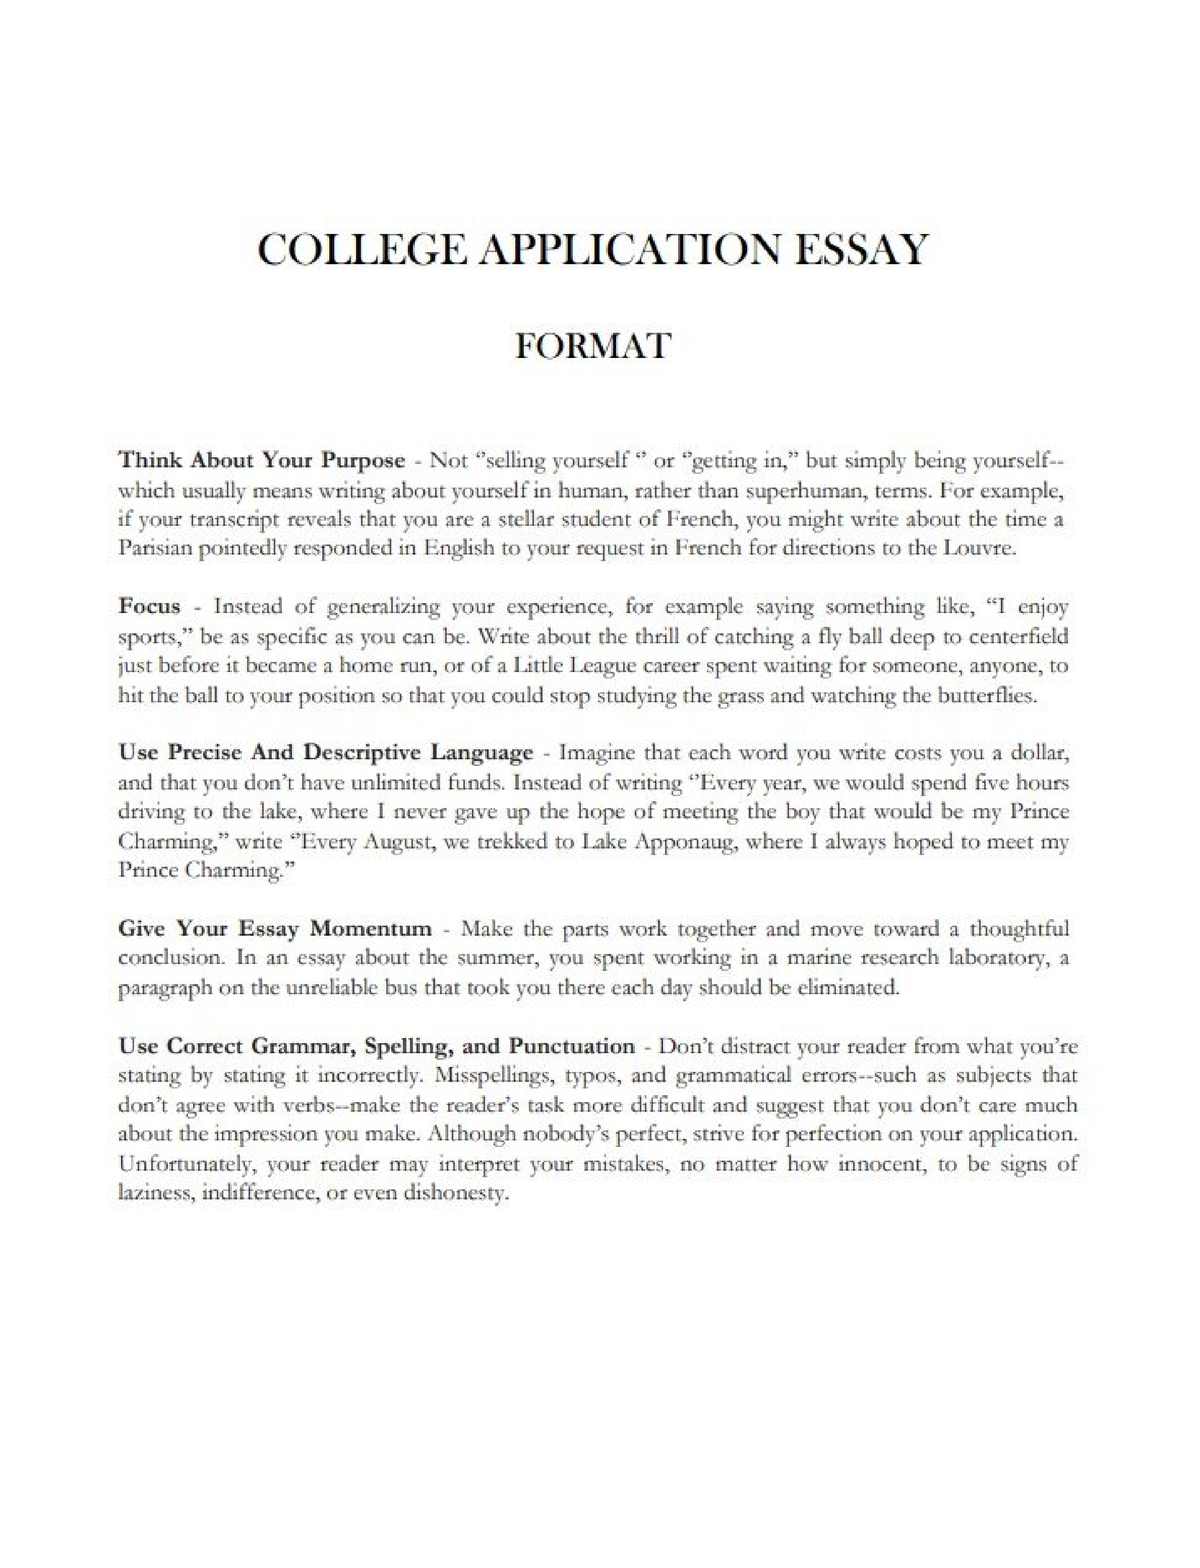 how to close a college application essay